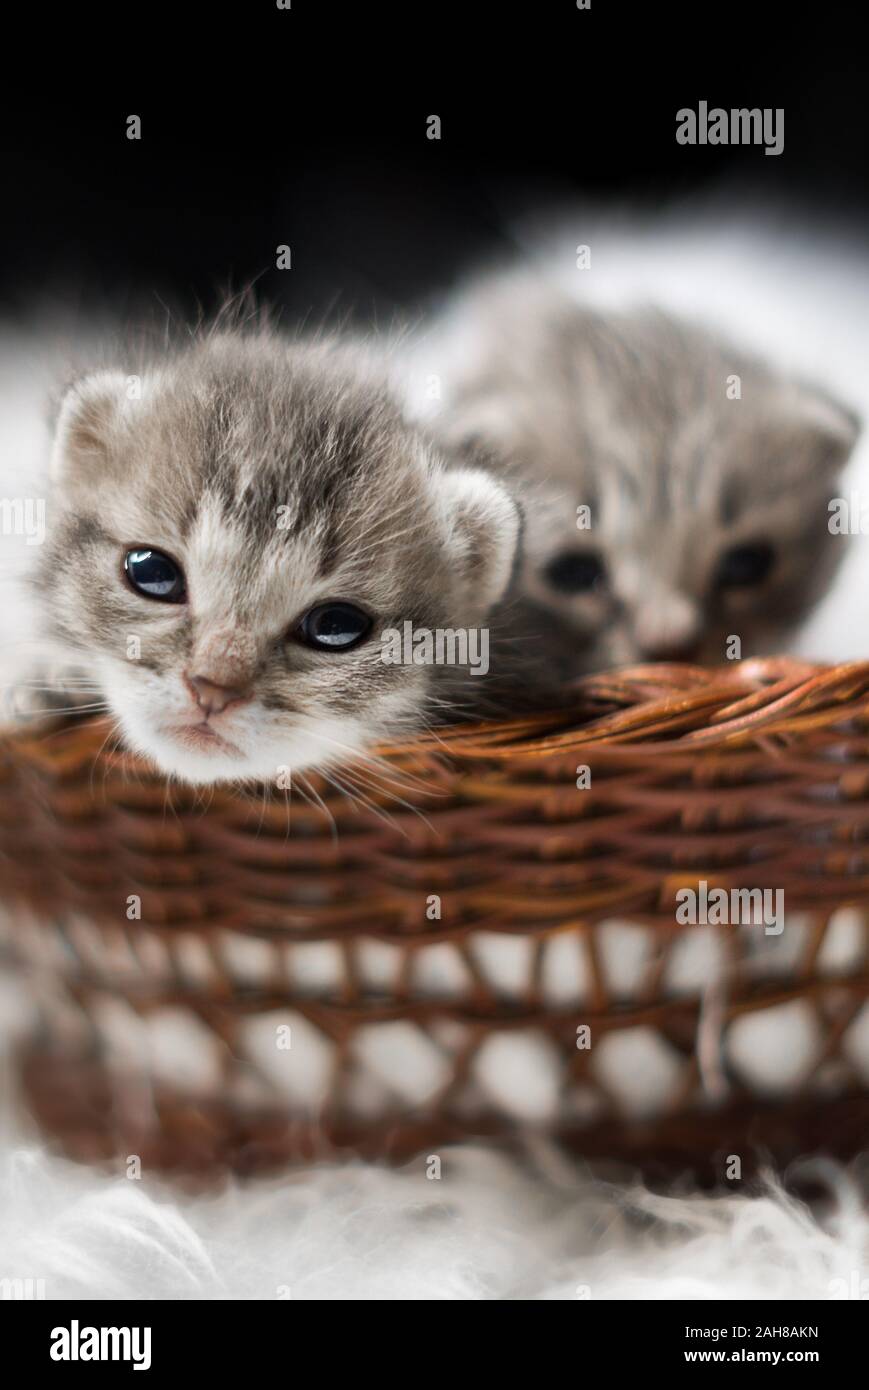 Close up portrait of two newborn grey tabby kitten lying in a wicker cradle and looking back at the camera, against a bokeh background Stock Photo